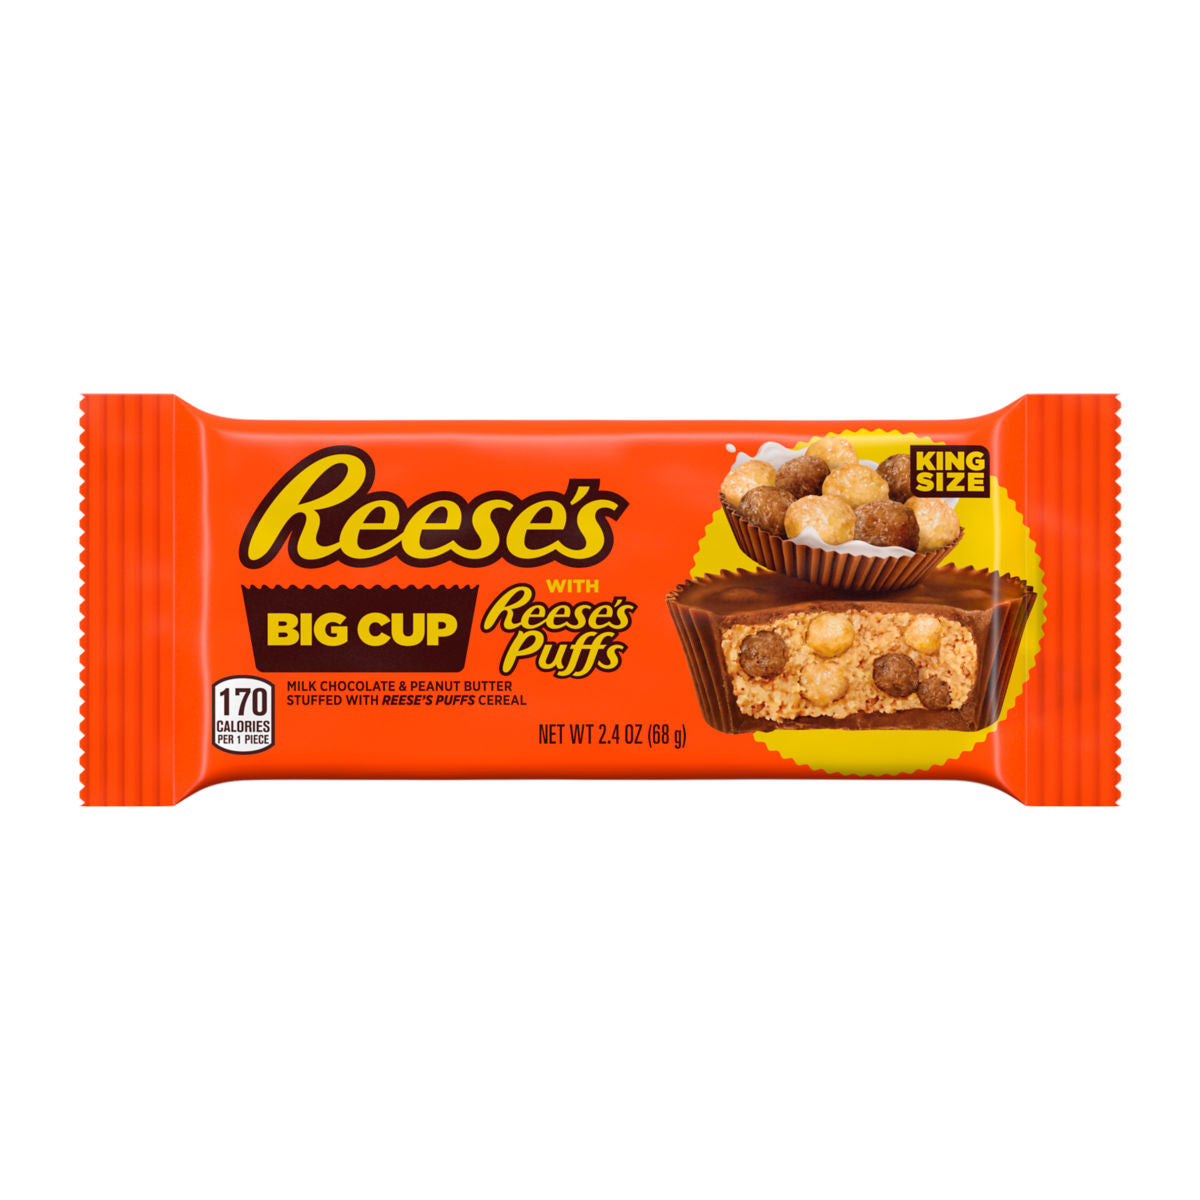 Reese's Big Cup Stuffed With Reese's Puffs King Size 2.4oz 16ct